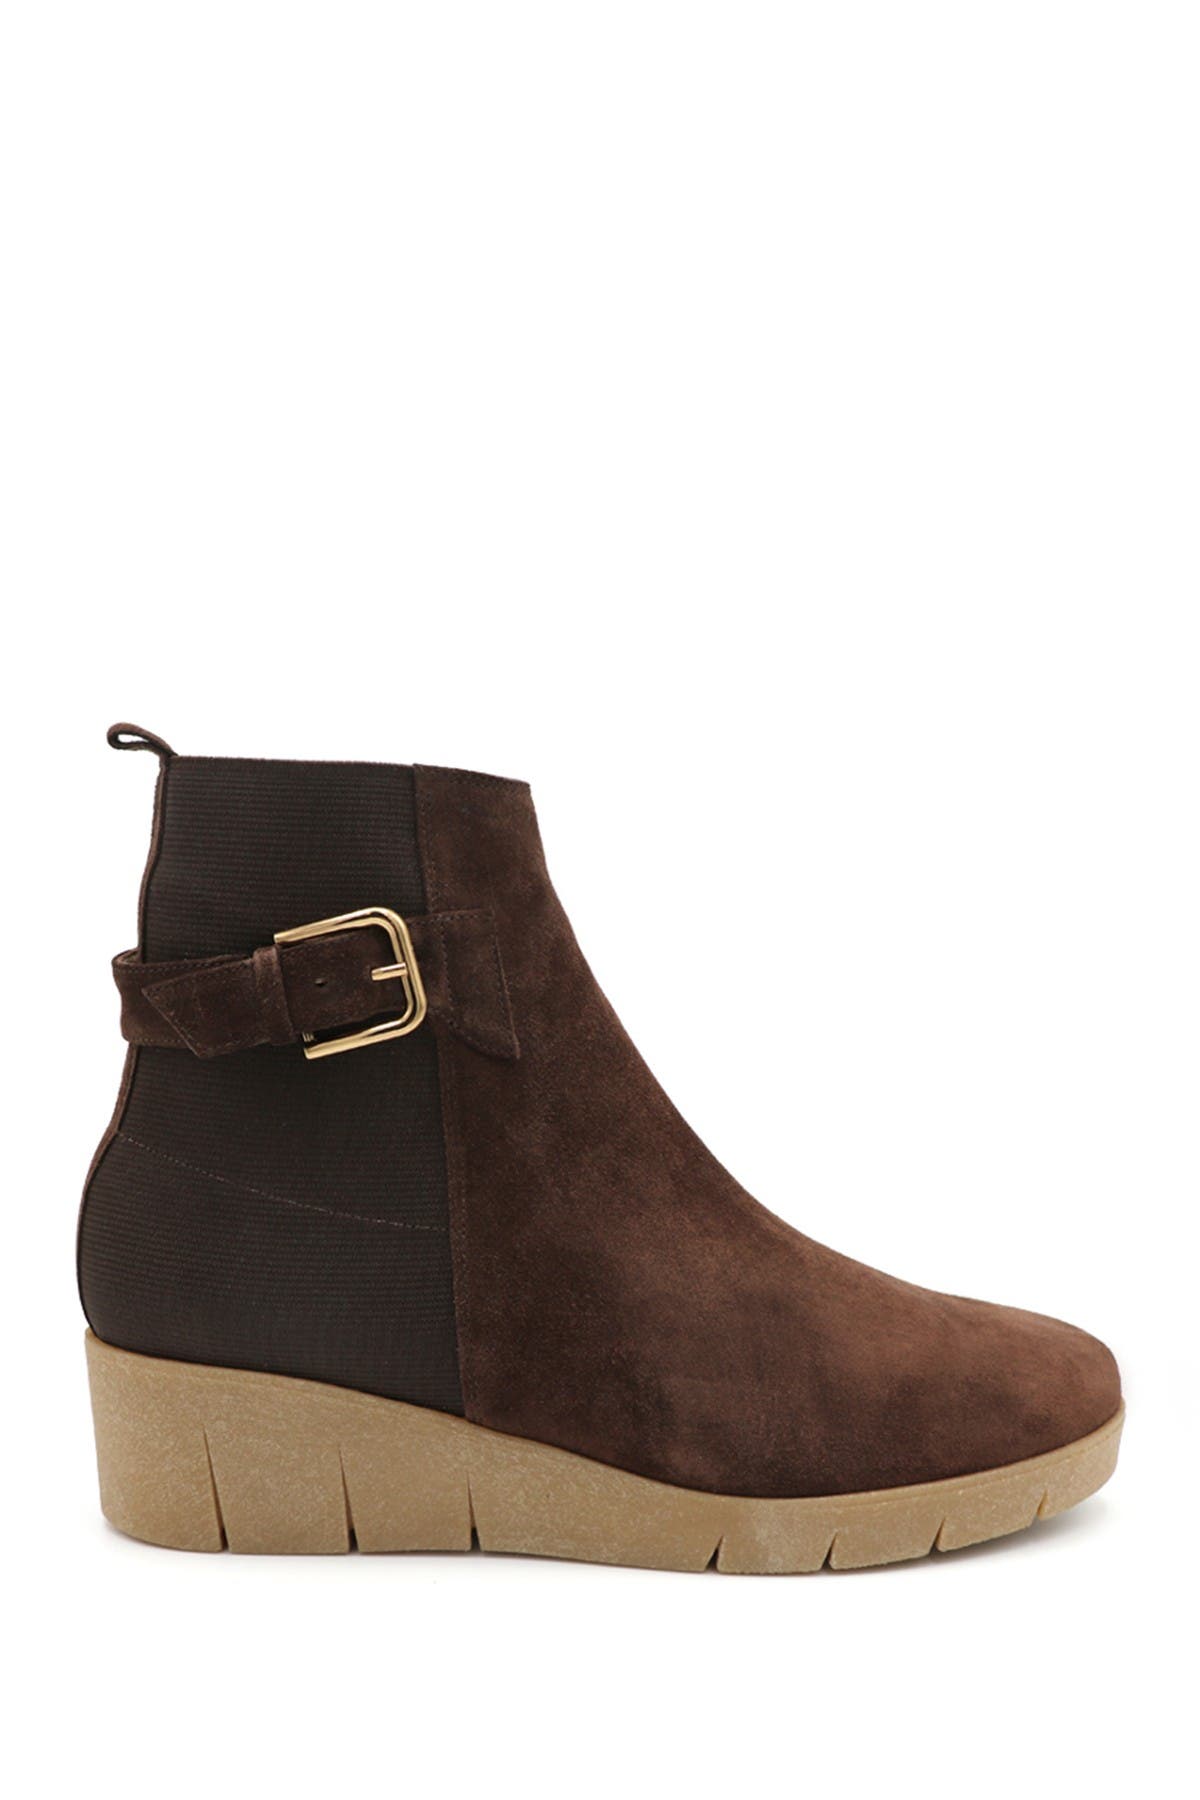 Amalfi By Rangoni Gianmaria Suede Bootie In Choco Velour